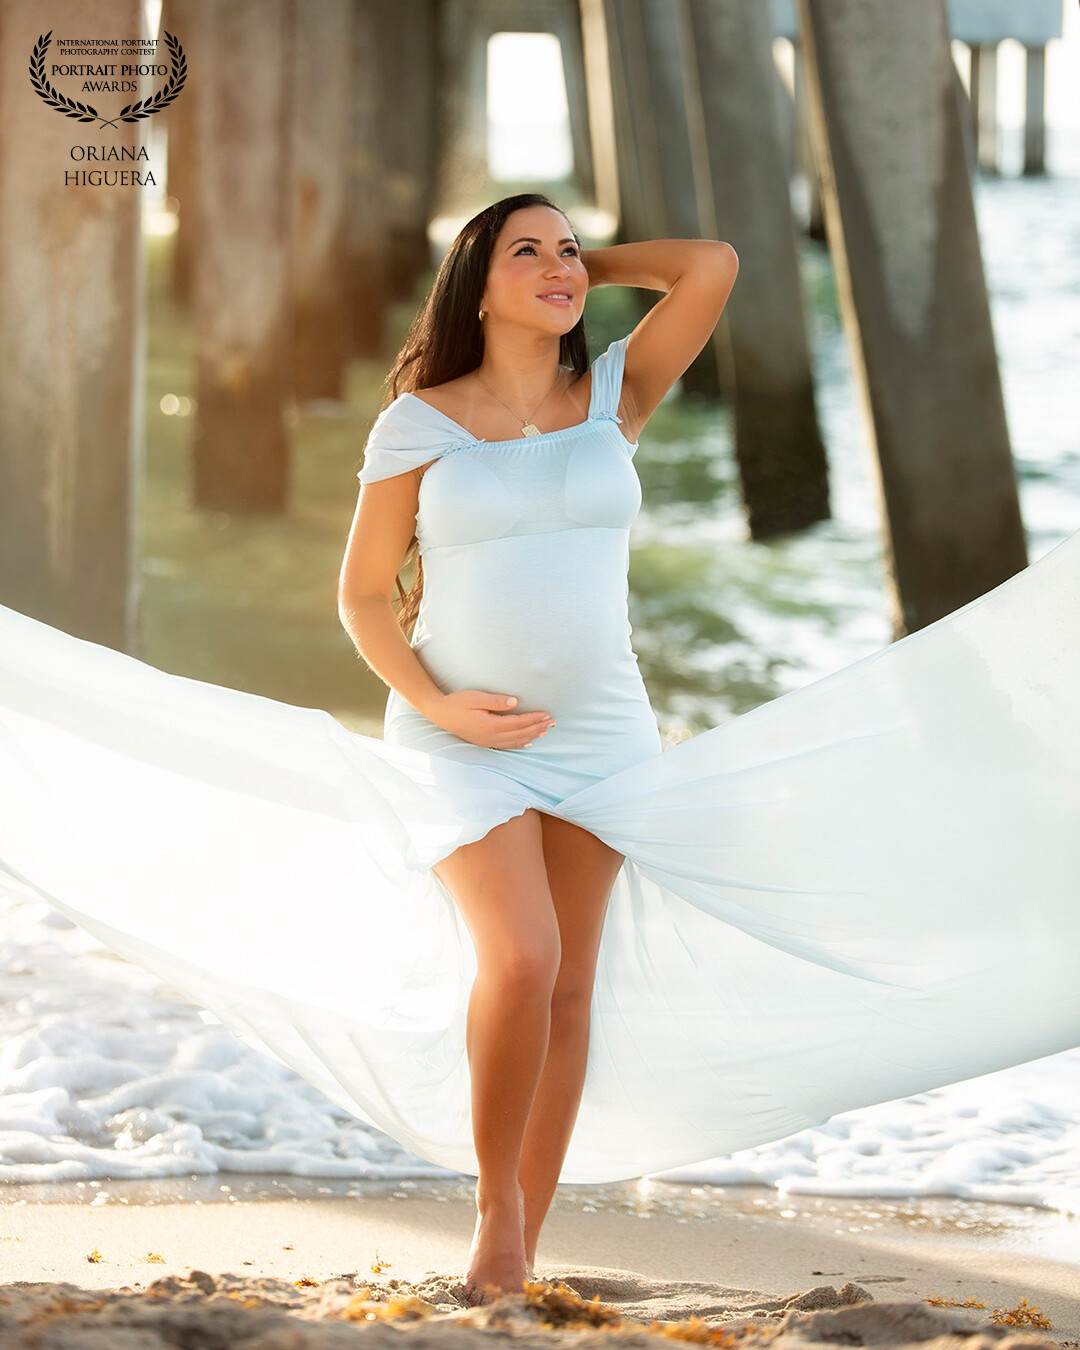 It's Paola first baby, and she wanted to celebrate her maternity with photos, we went to the beach at sunrise and God gave us the most beautiful Sunlight that we could ask for. This image was made with natural light  under the pier.